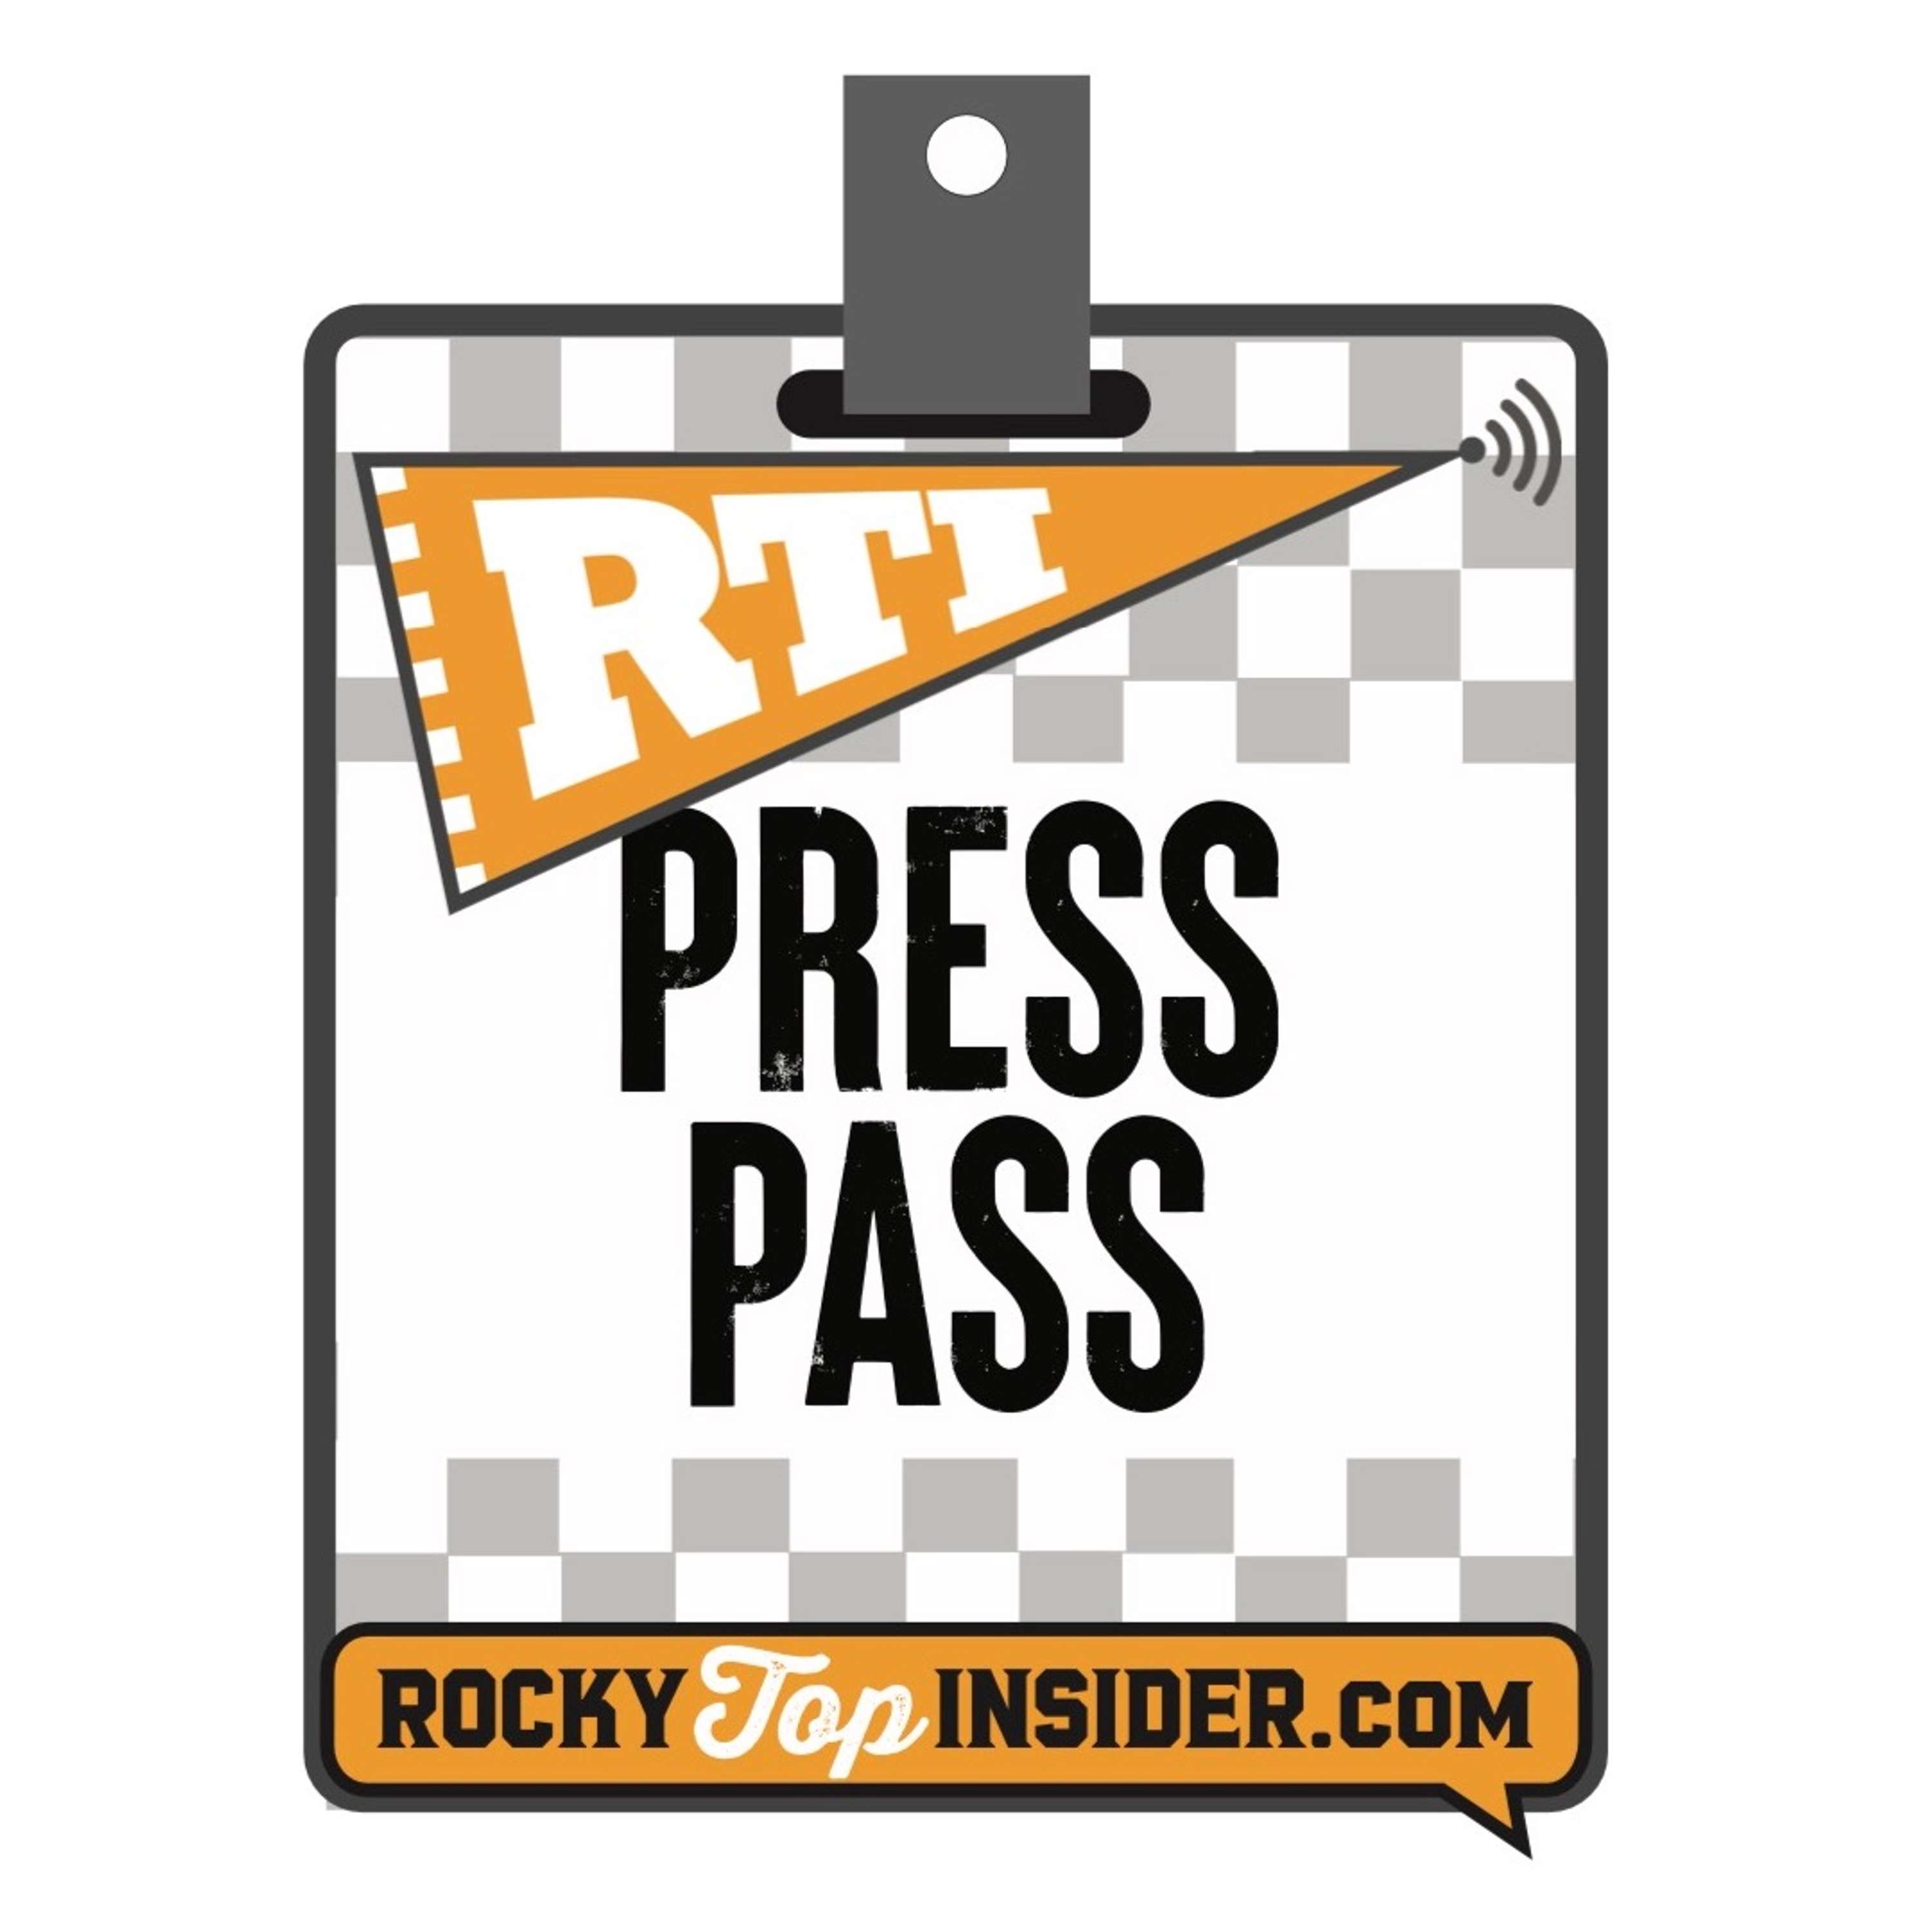 Tennessee Baseball Picks Up Another Series Win, In the Mix for SEC Crown | RTI Press Pass Baseball Podcast